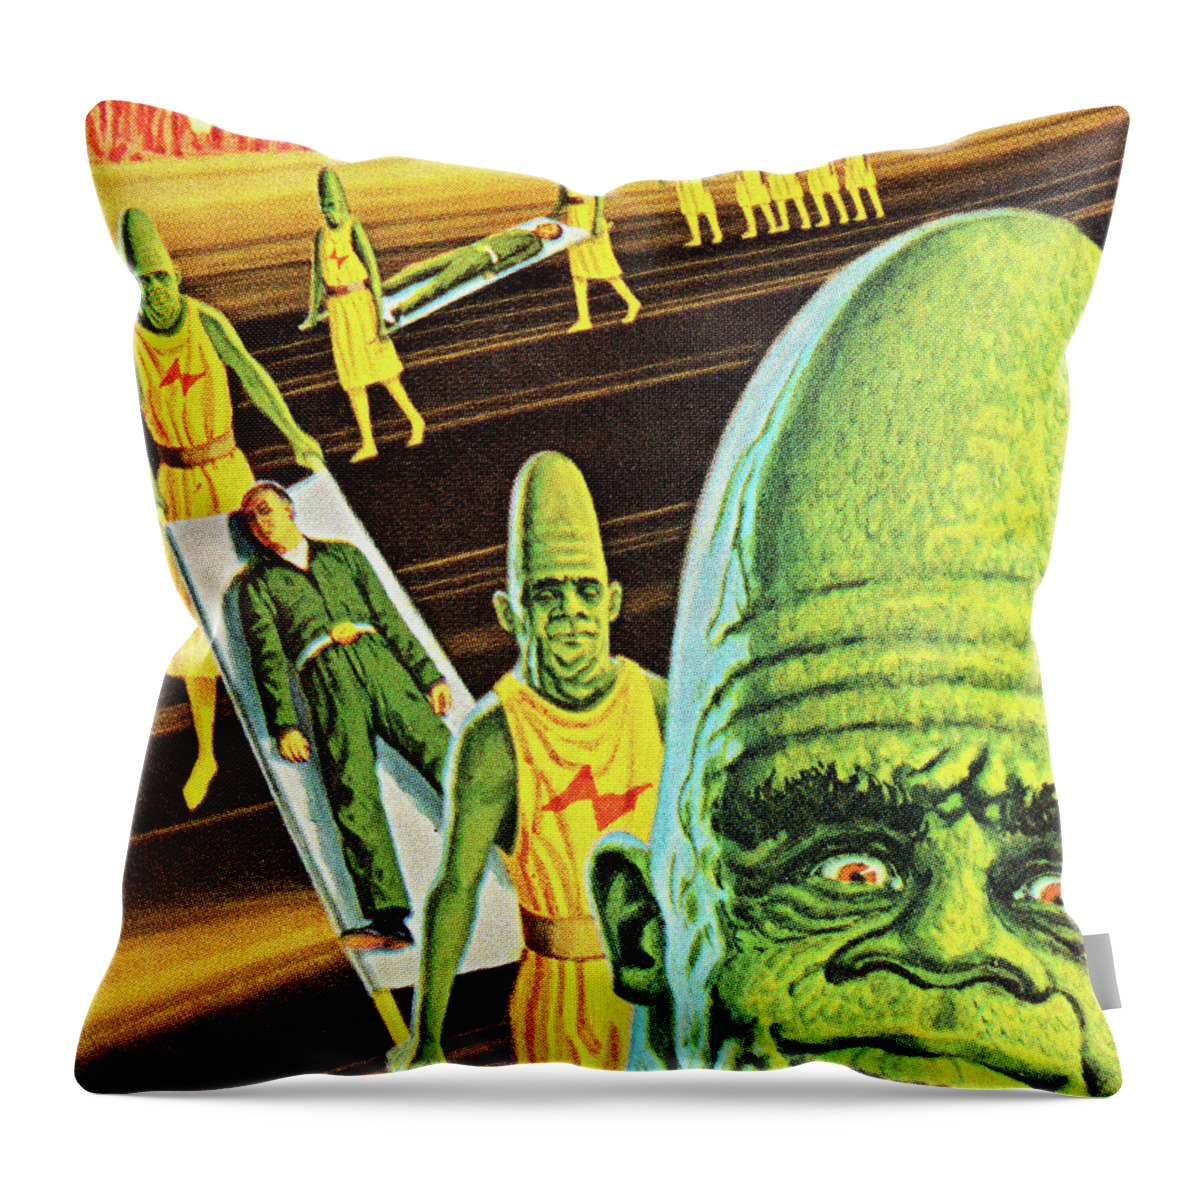 Abduction Throw Pillow featuring the drawing Aliens Taking a Human by CSA Images